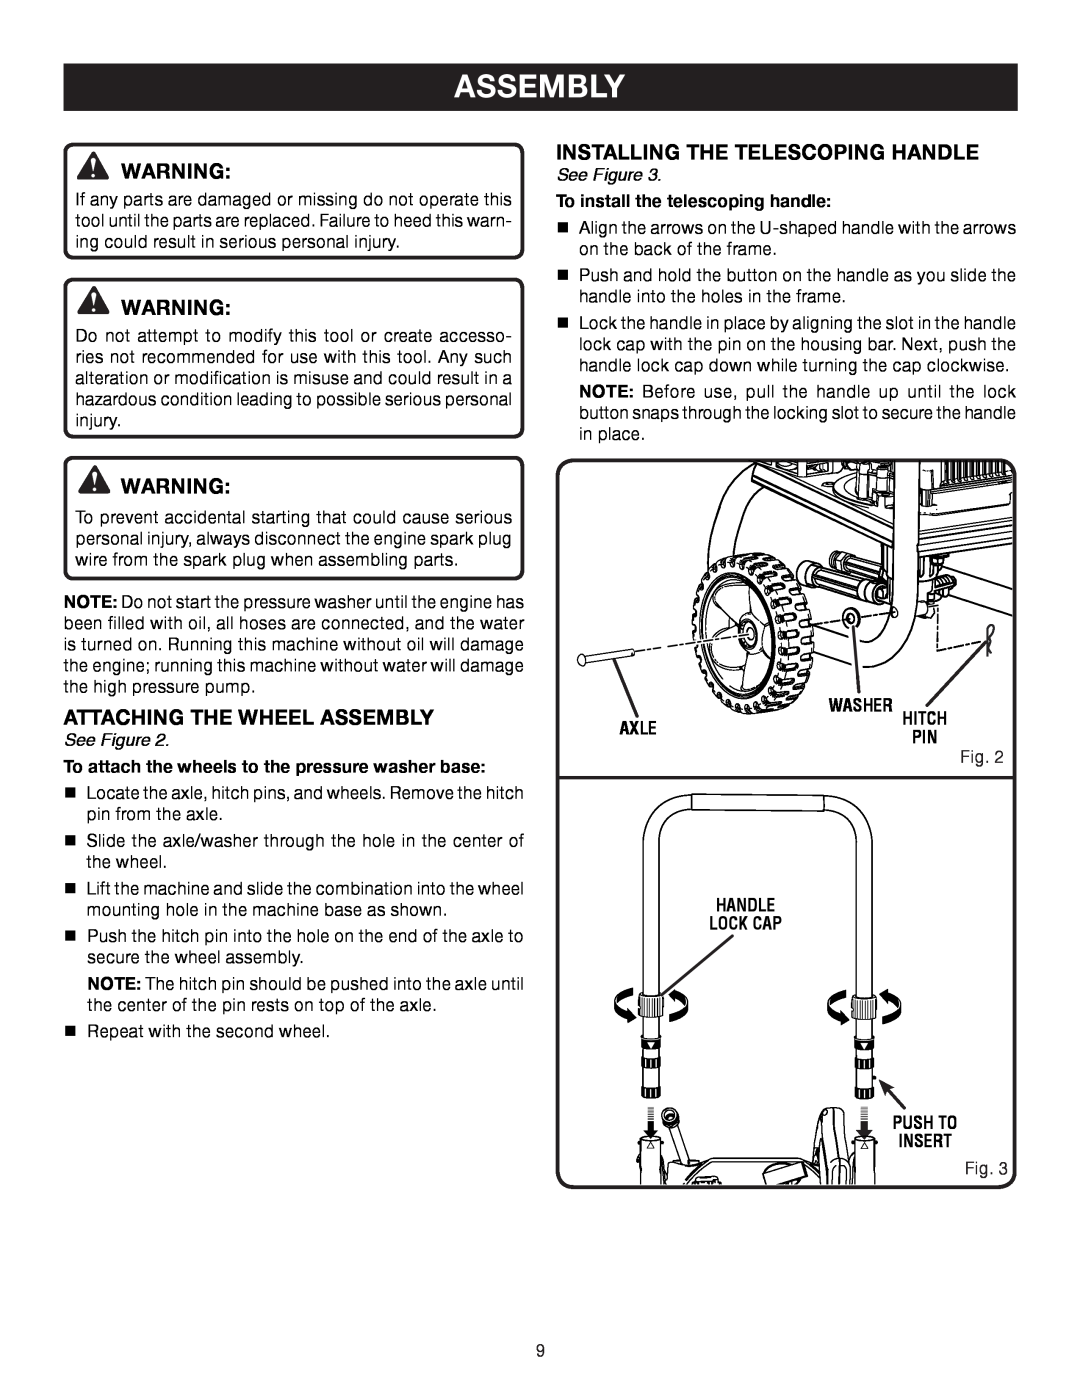 Briggs & Stratton HU80530, HU80931 manual Attaching The Wheel Assembly, Installing The Telescoping Handle, See Figure, Axle 